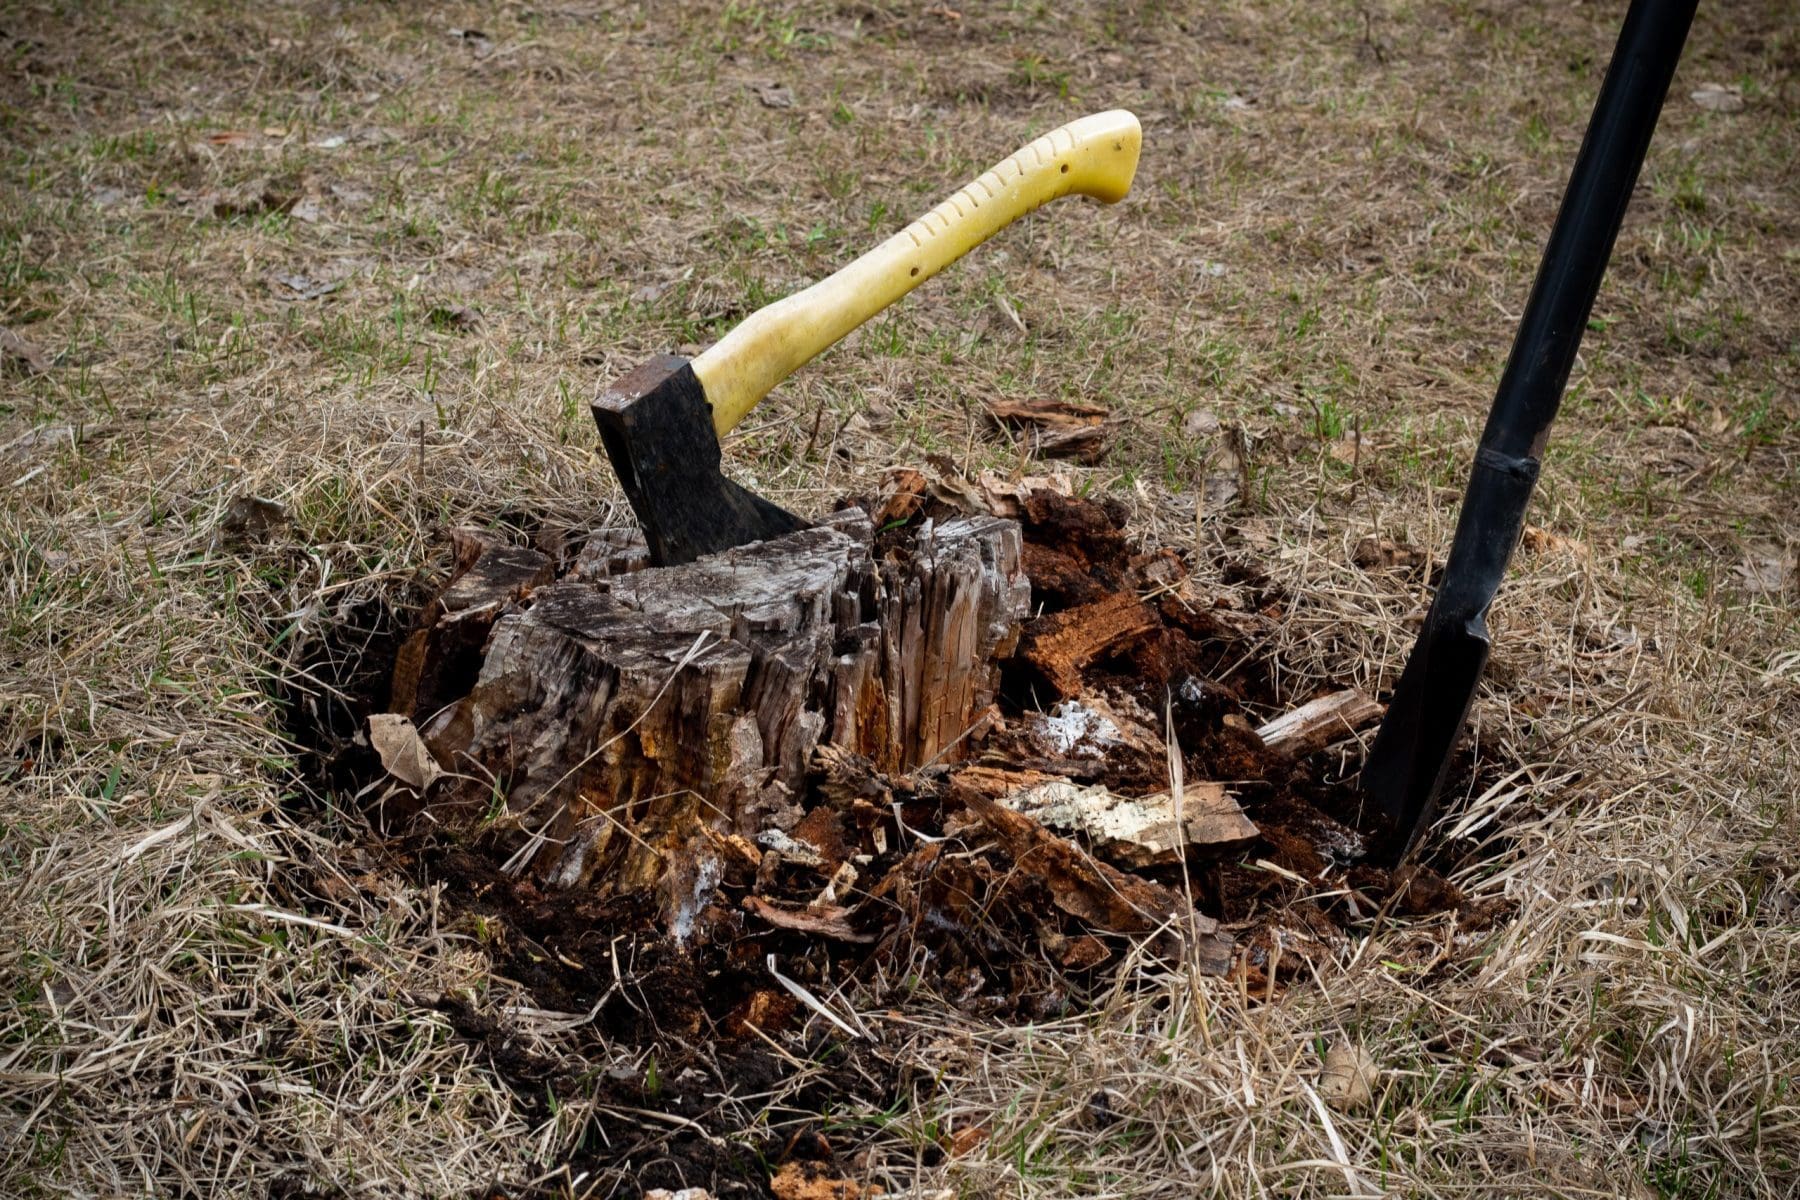 Axe in stump with pick dig into the side of stump.